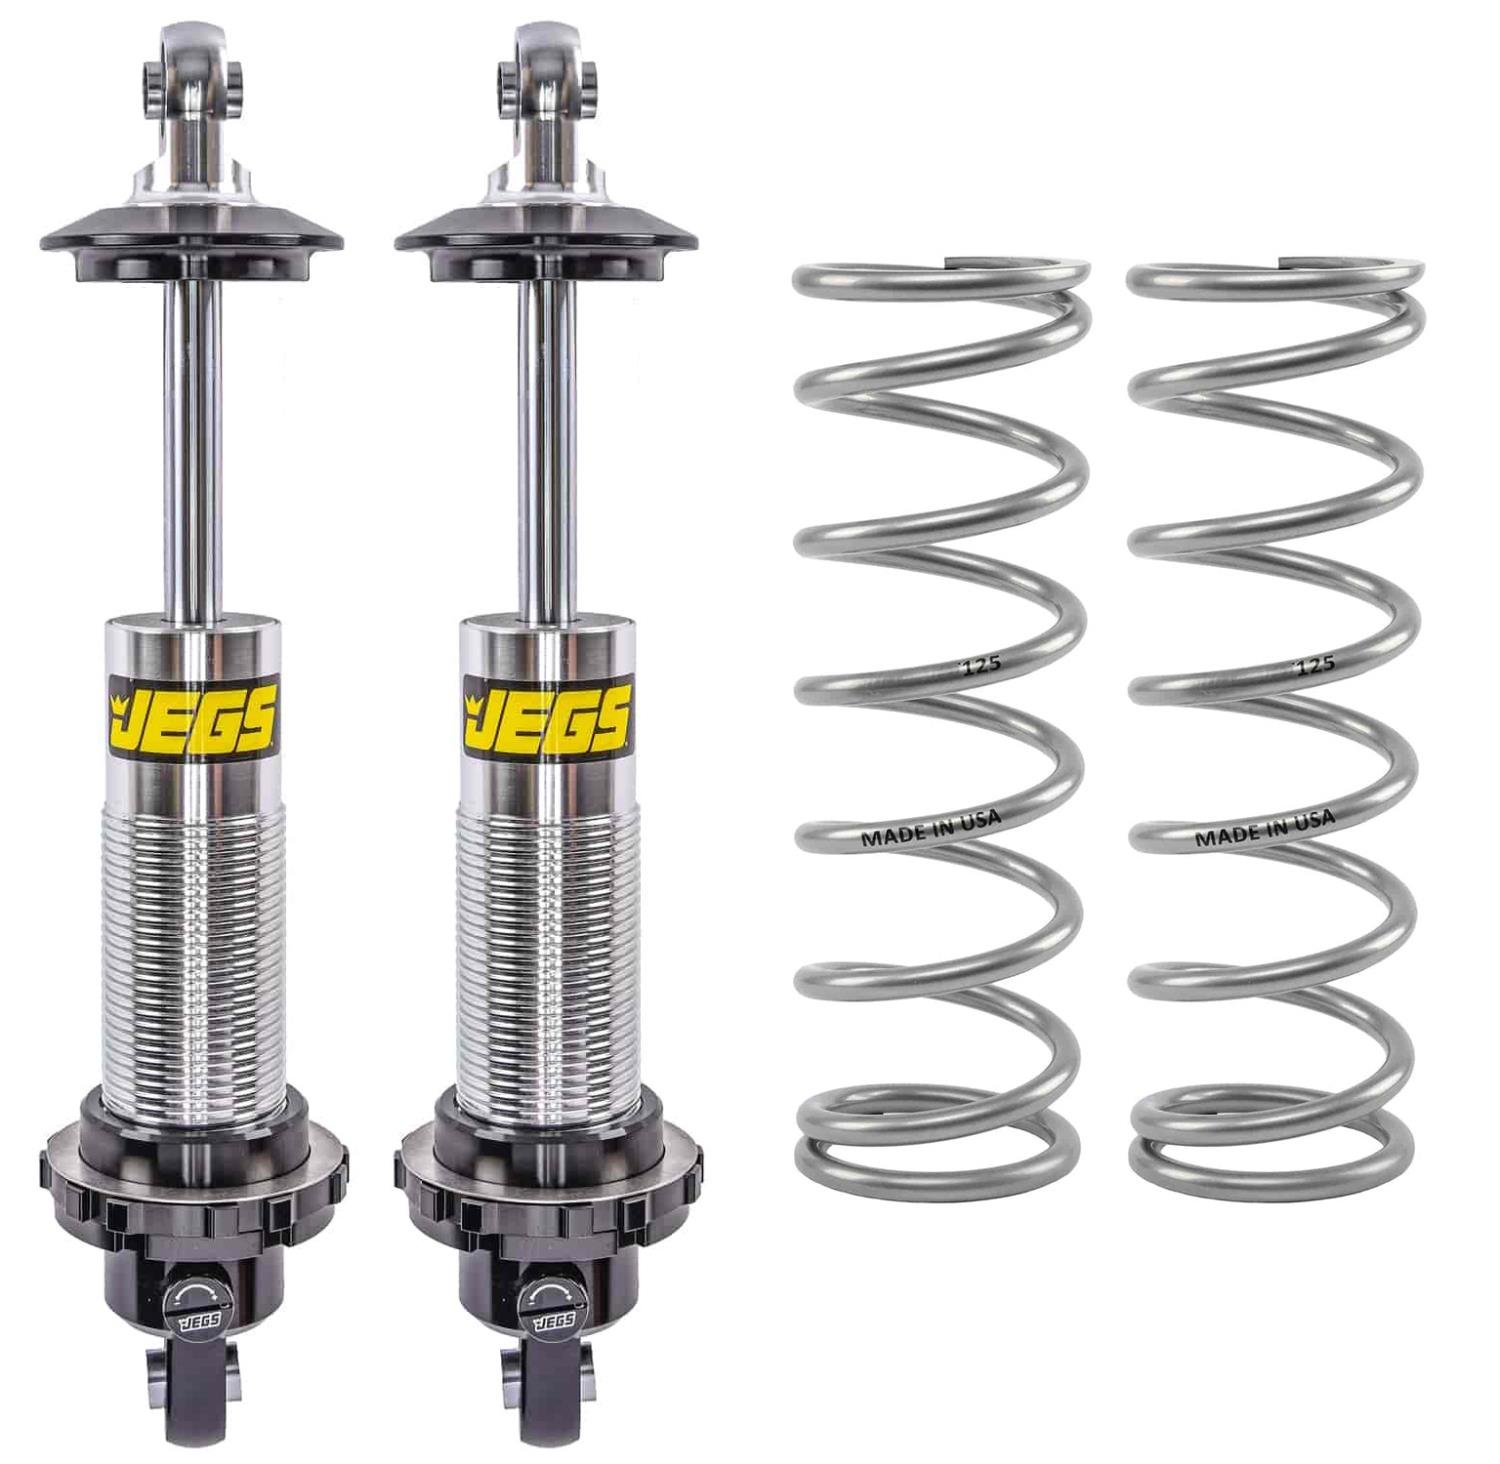 Single Adjustable Coil-Over Shocks and Coil-Over Springs Kit [10 in., 125 lbs./in. Springs]